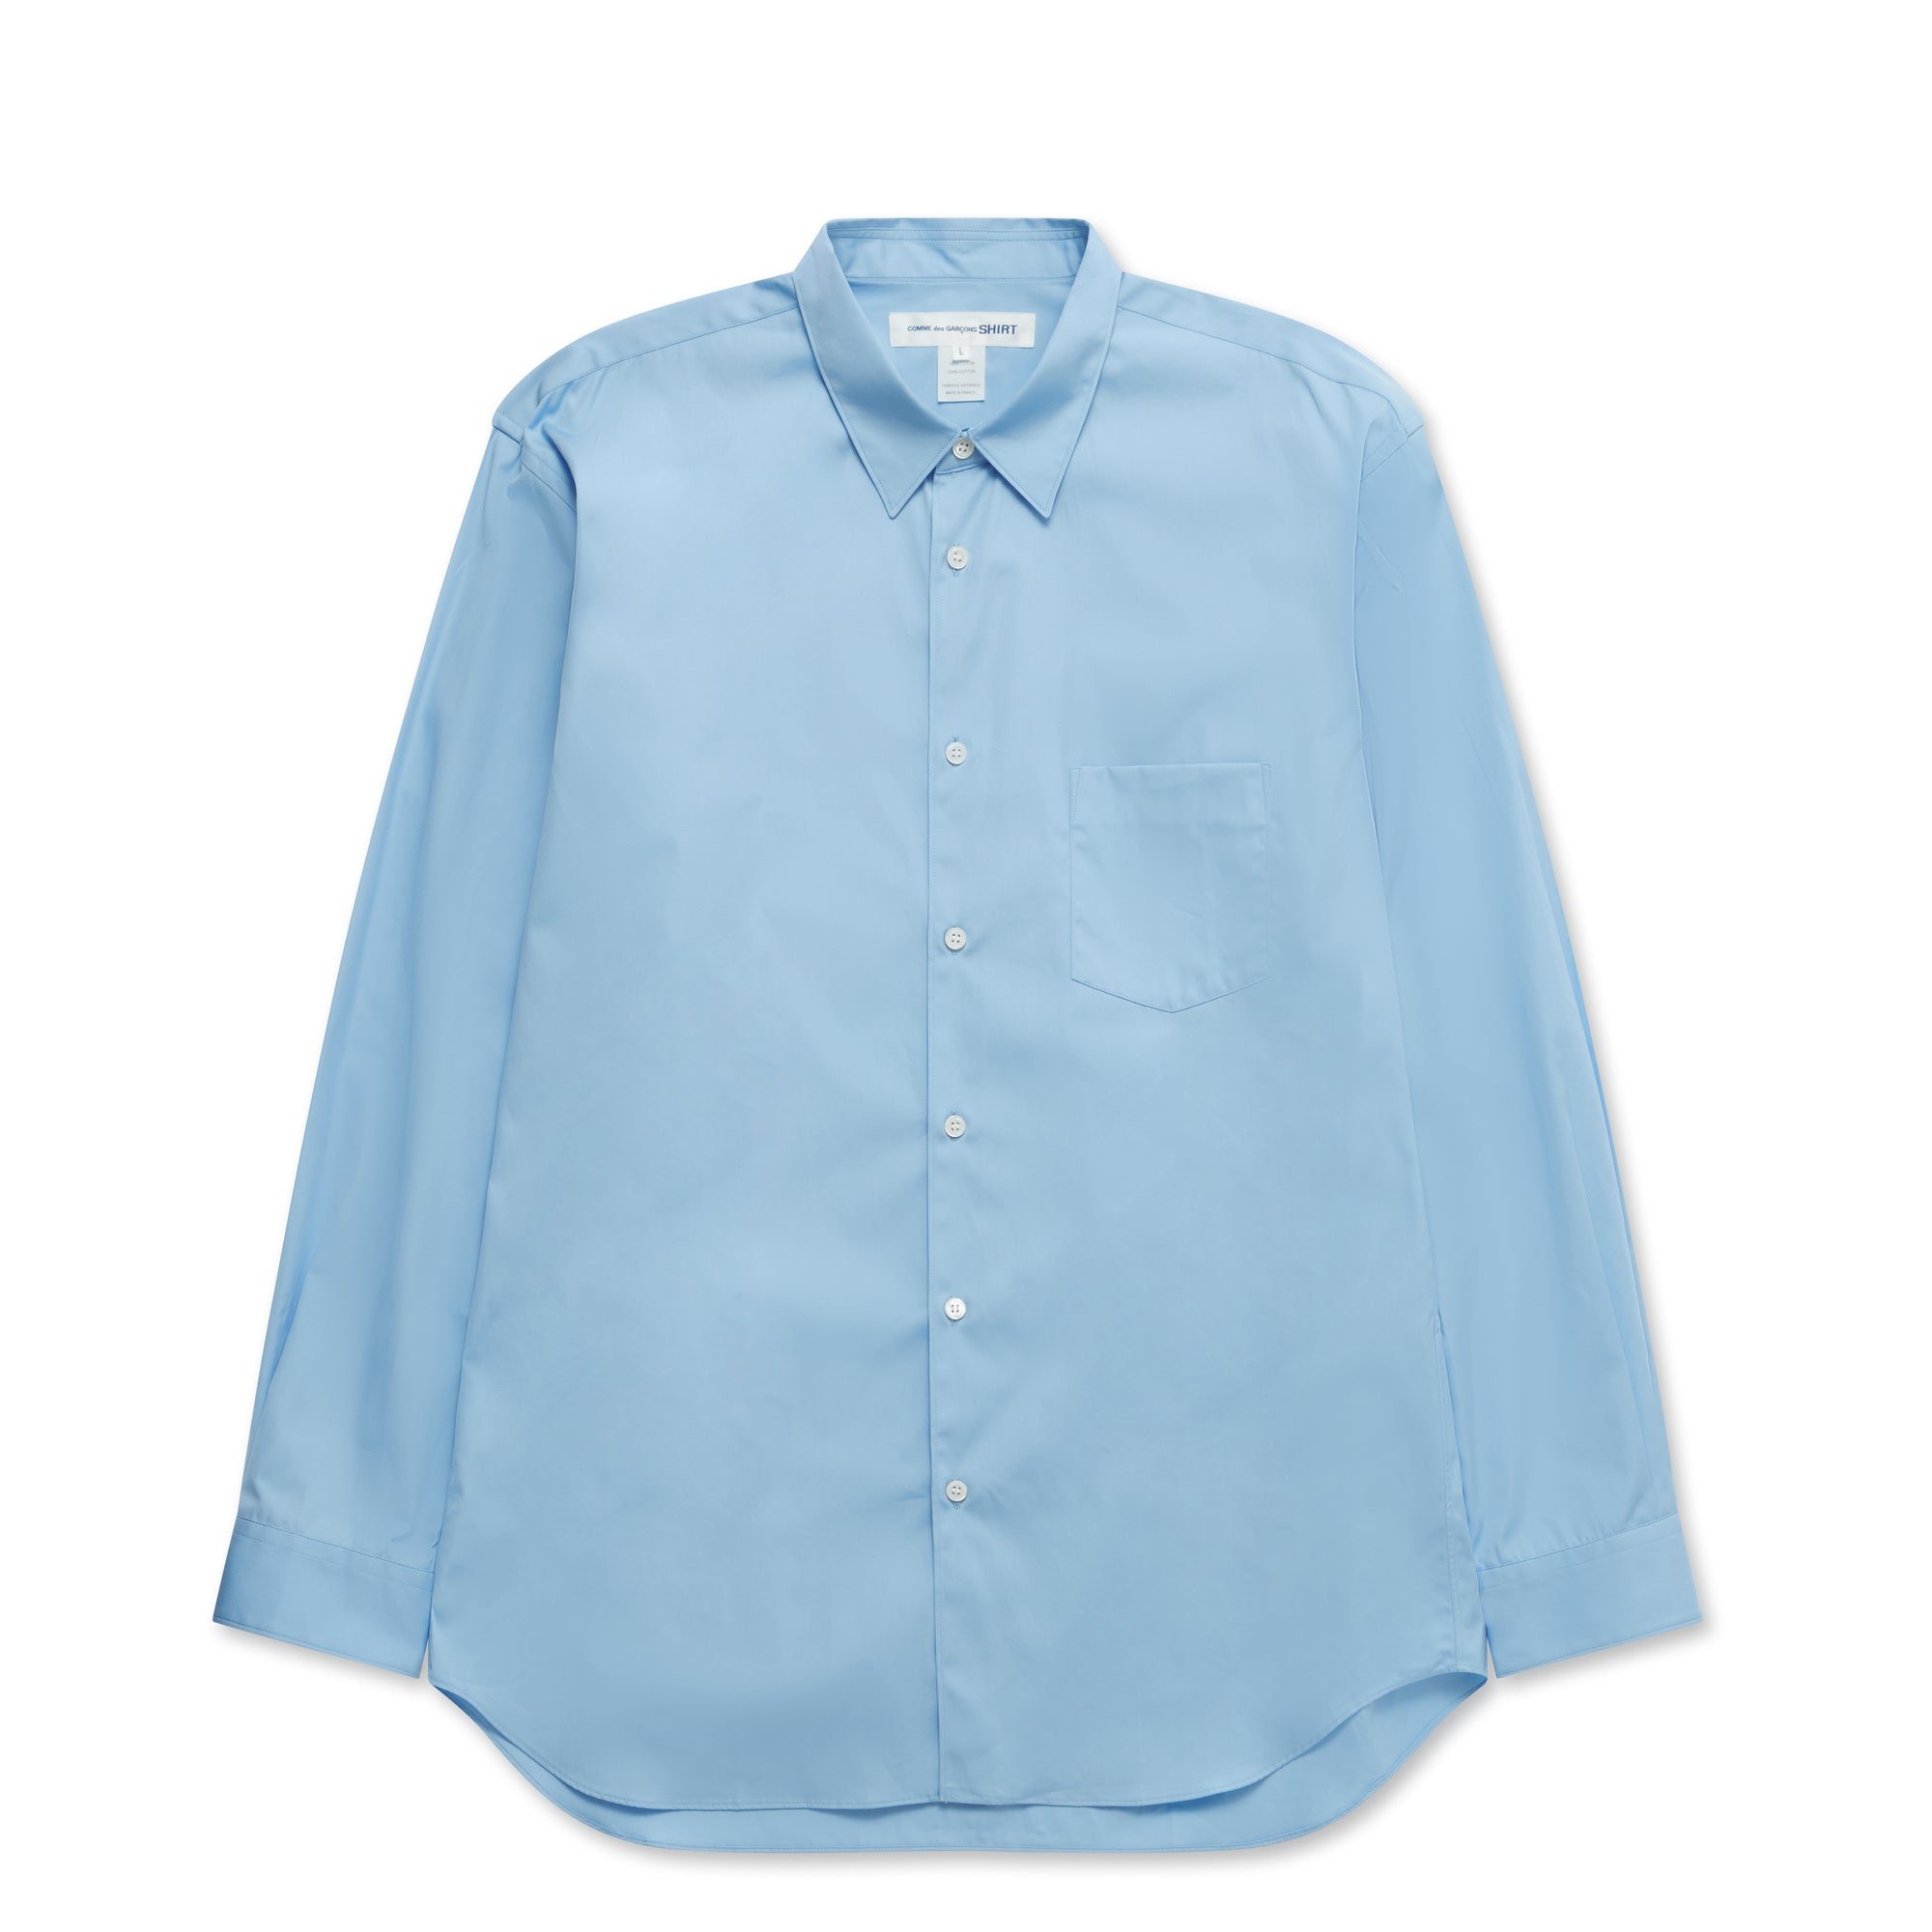 CDG Shirt Forever - Classic Fit Woven Cotton Shirt - (Baby Blue) view 1